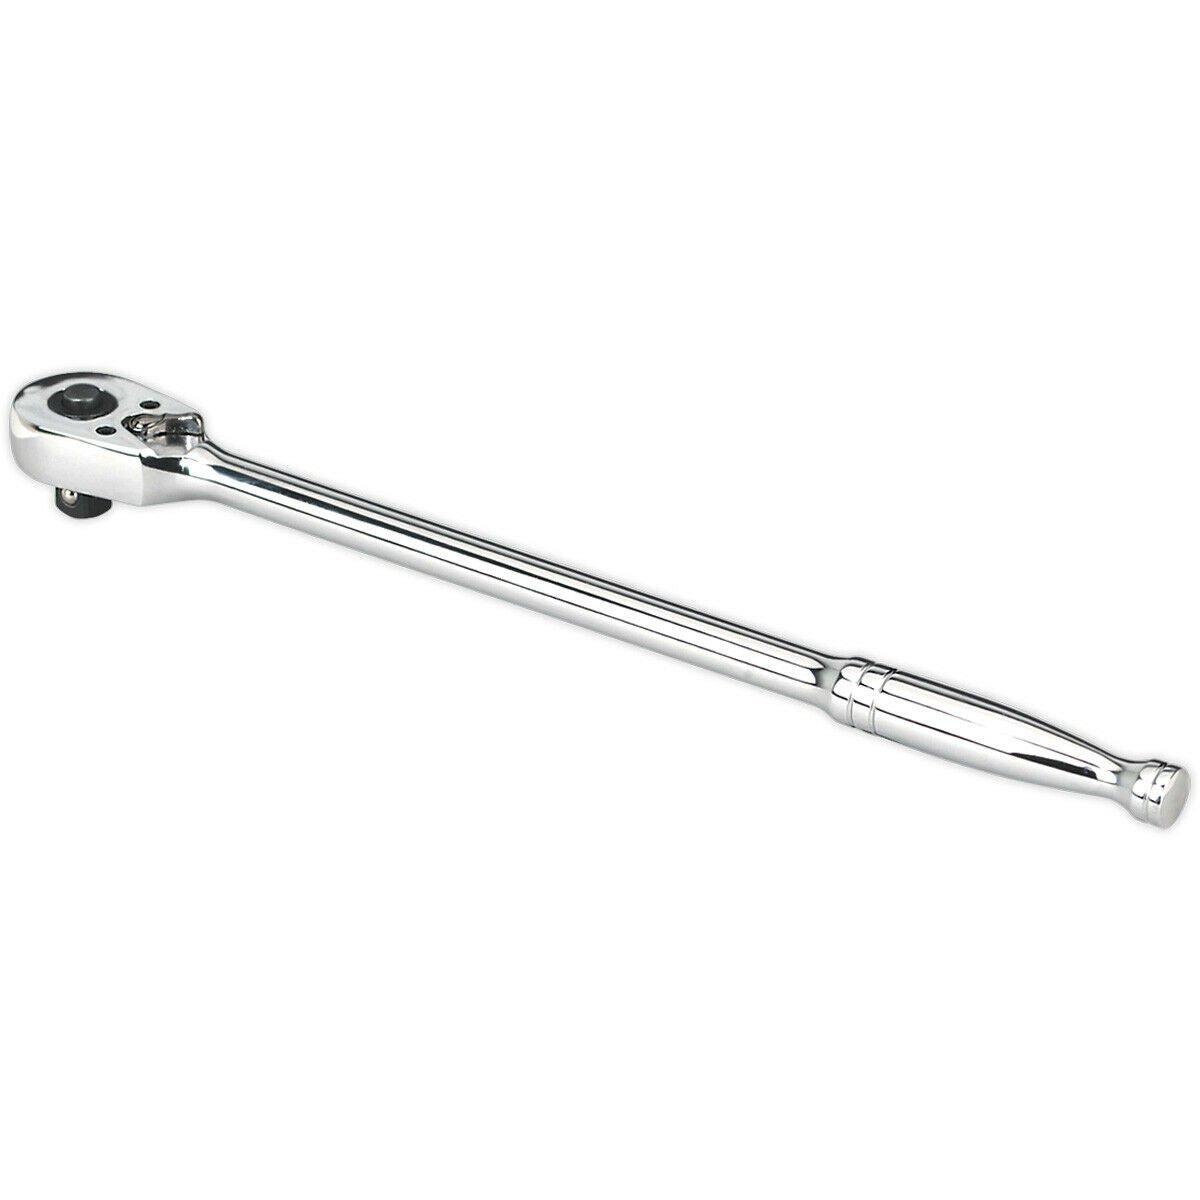 Long Reach 48-Tooth Pear-Head Ratchet Wrench - 3/8 Inch Sq Drive - Flip Reverse